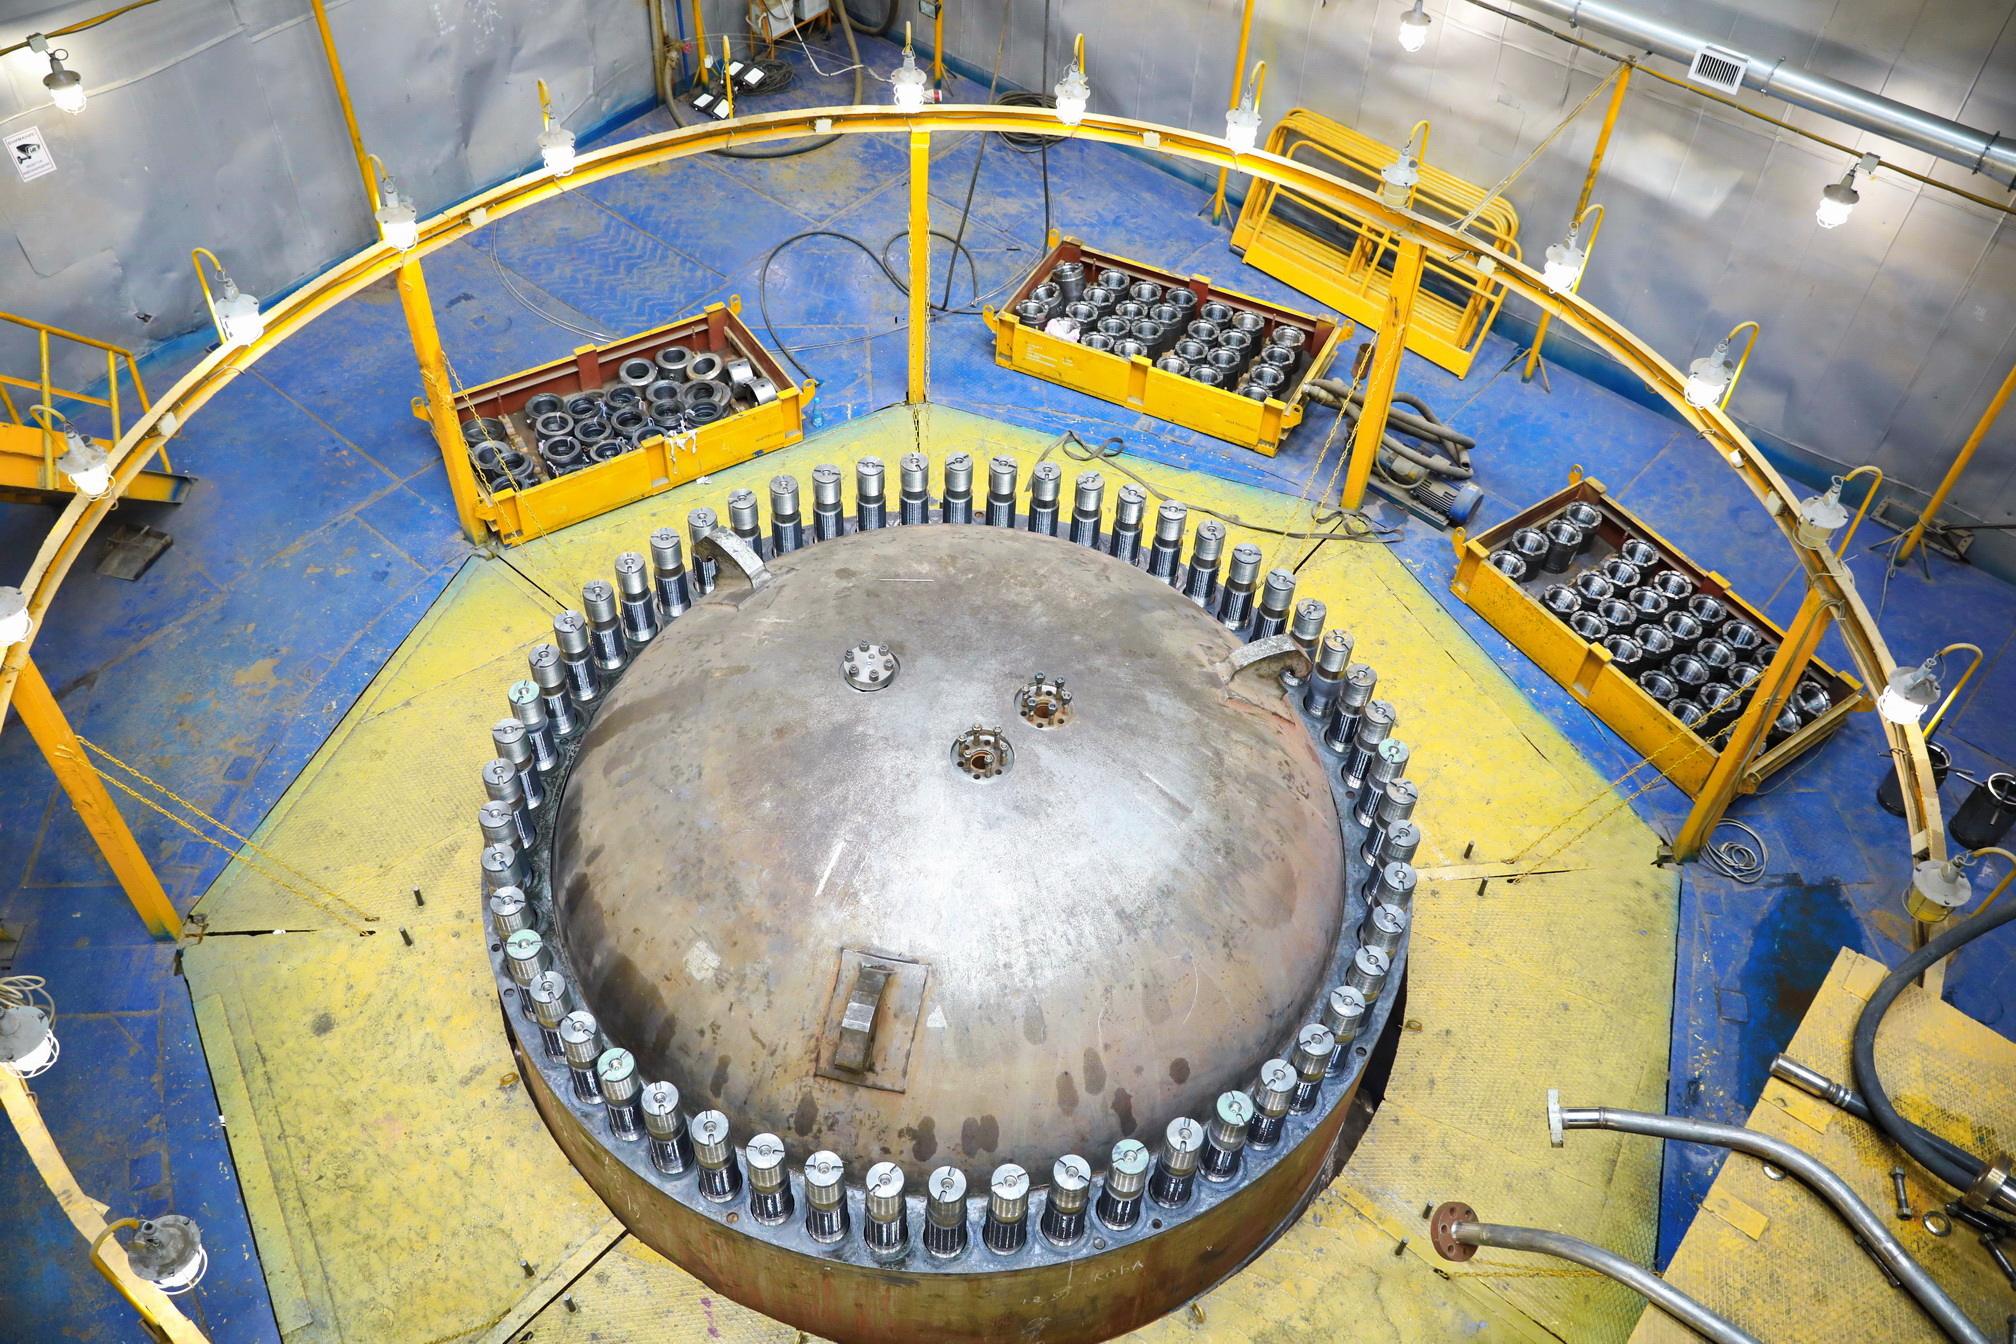 Atommash has performed the hydraulic test of reactor pressure vessel for the first power unit of Rooppur NPP under construction in Republic of Bangladesh